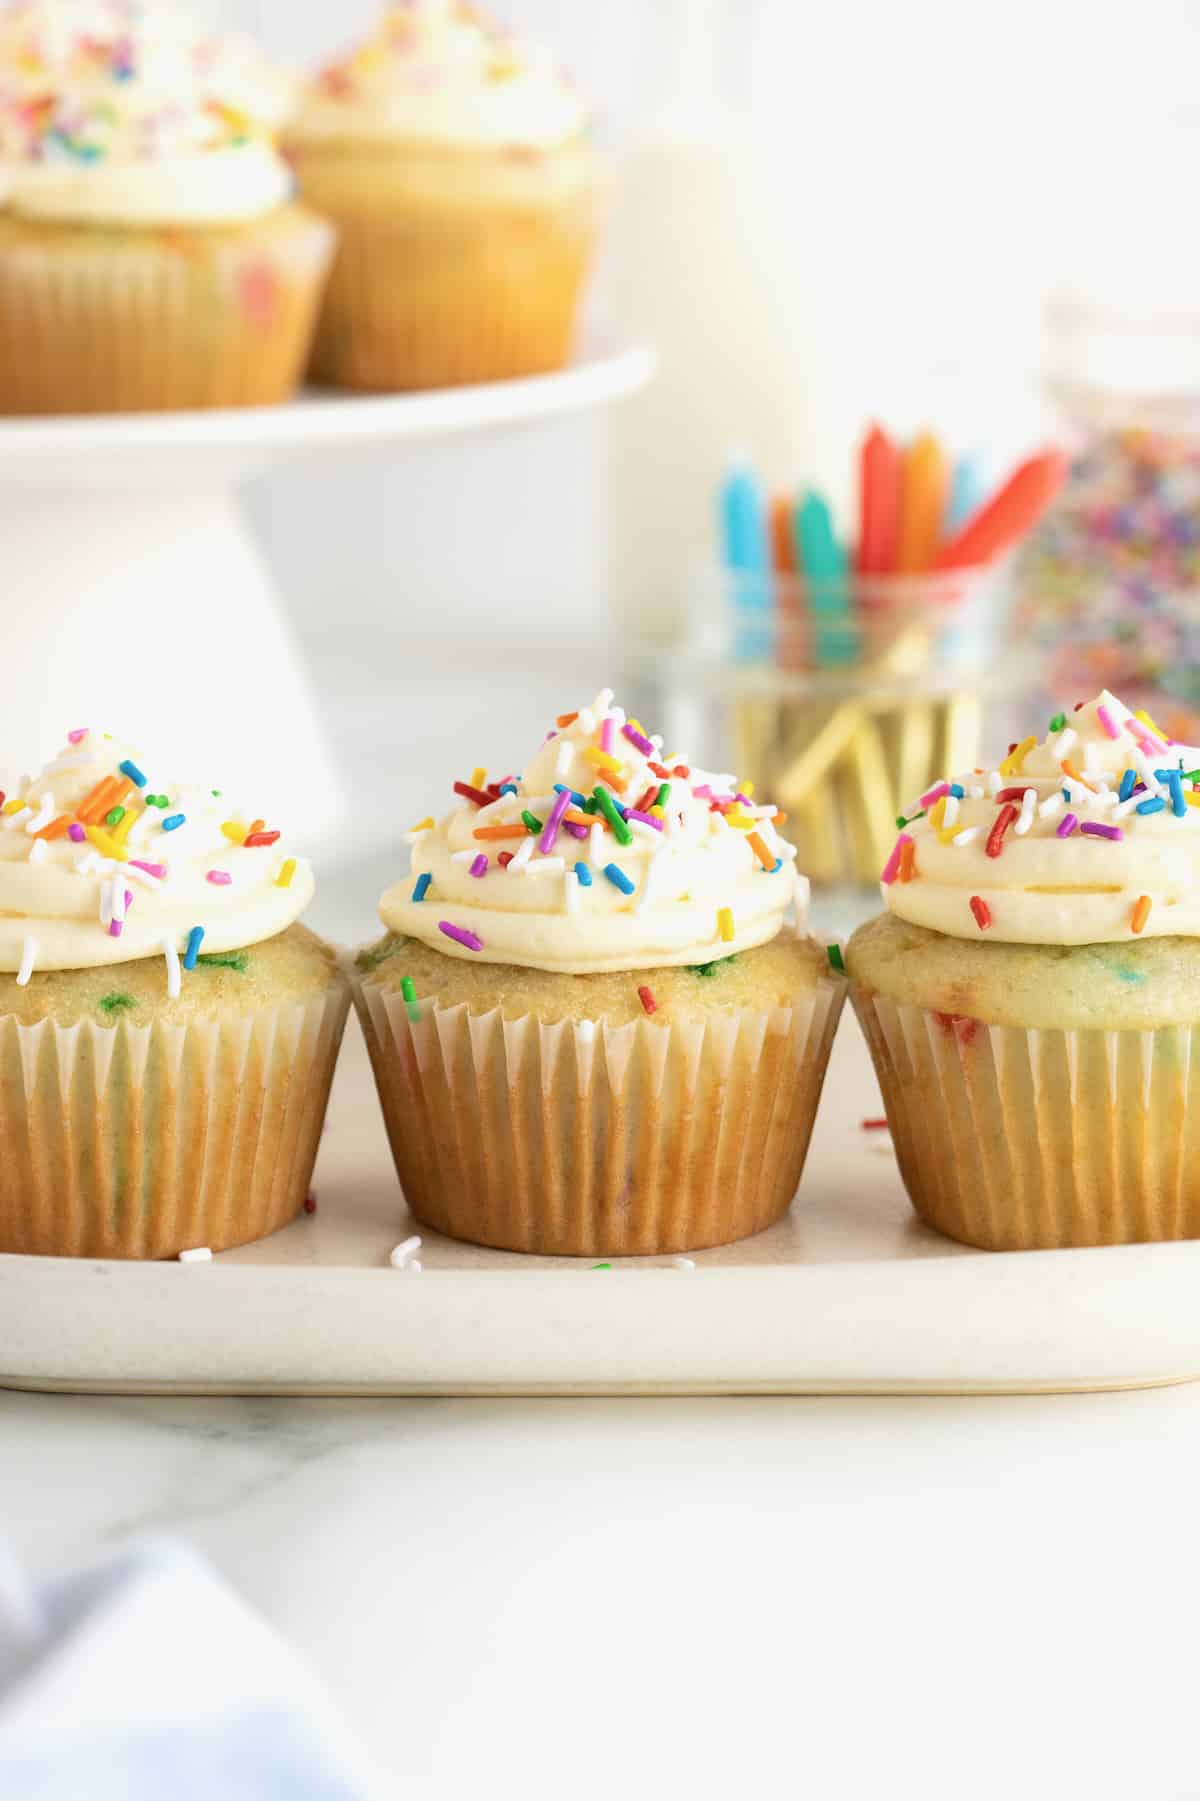 Three vanilla confetti cupcakes with white frosting and colored sprinkles on a white platter.